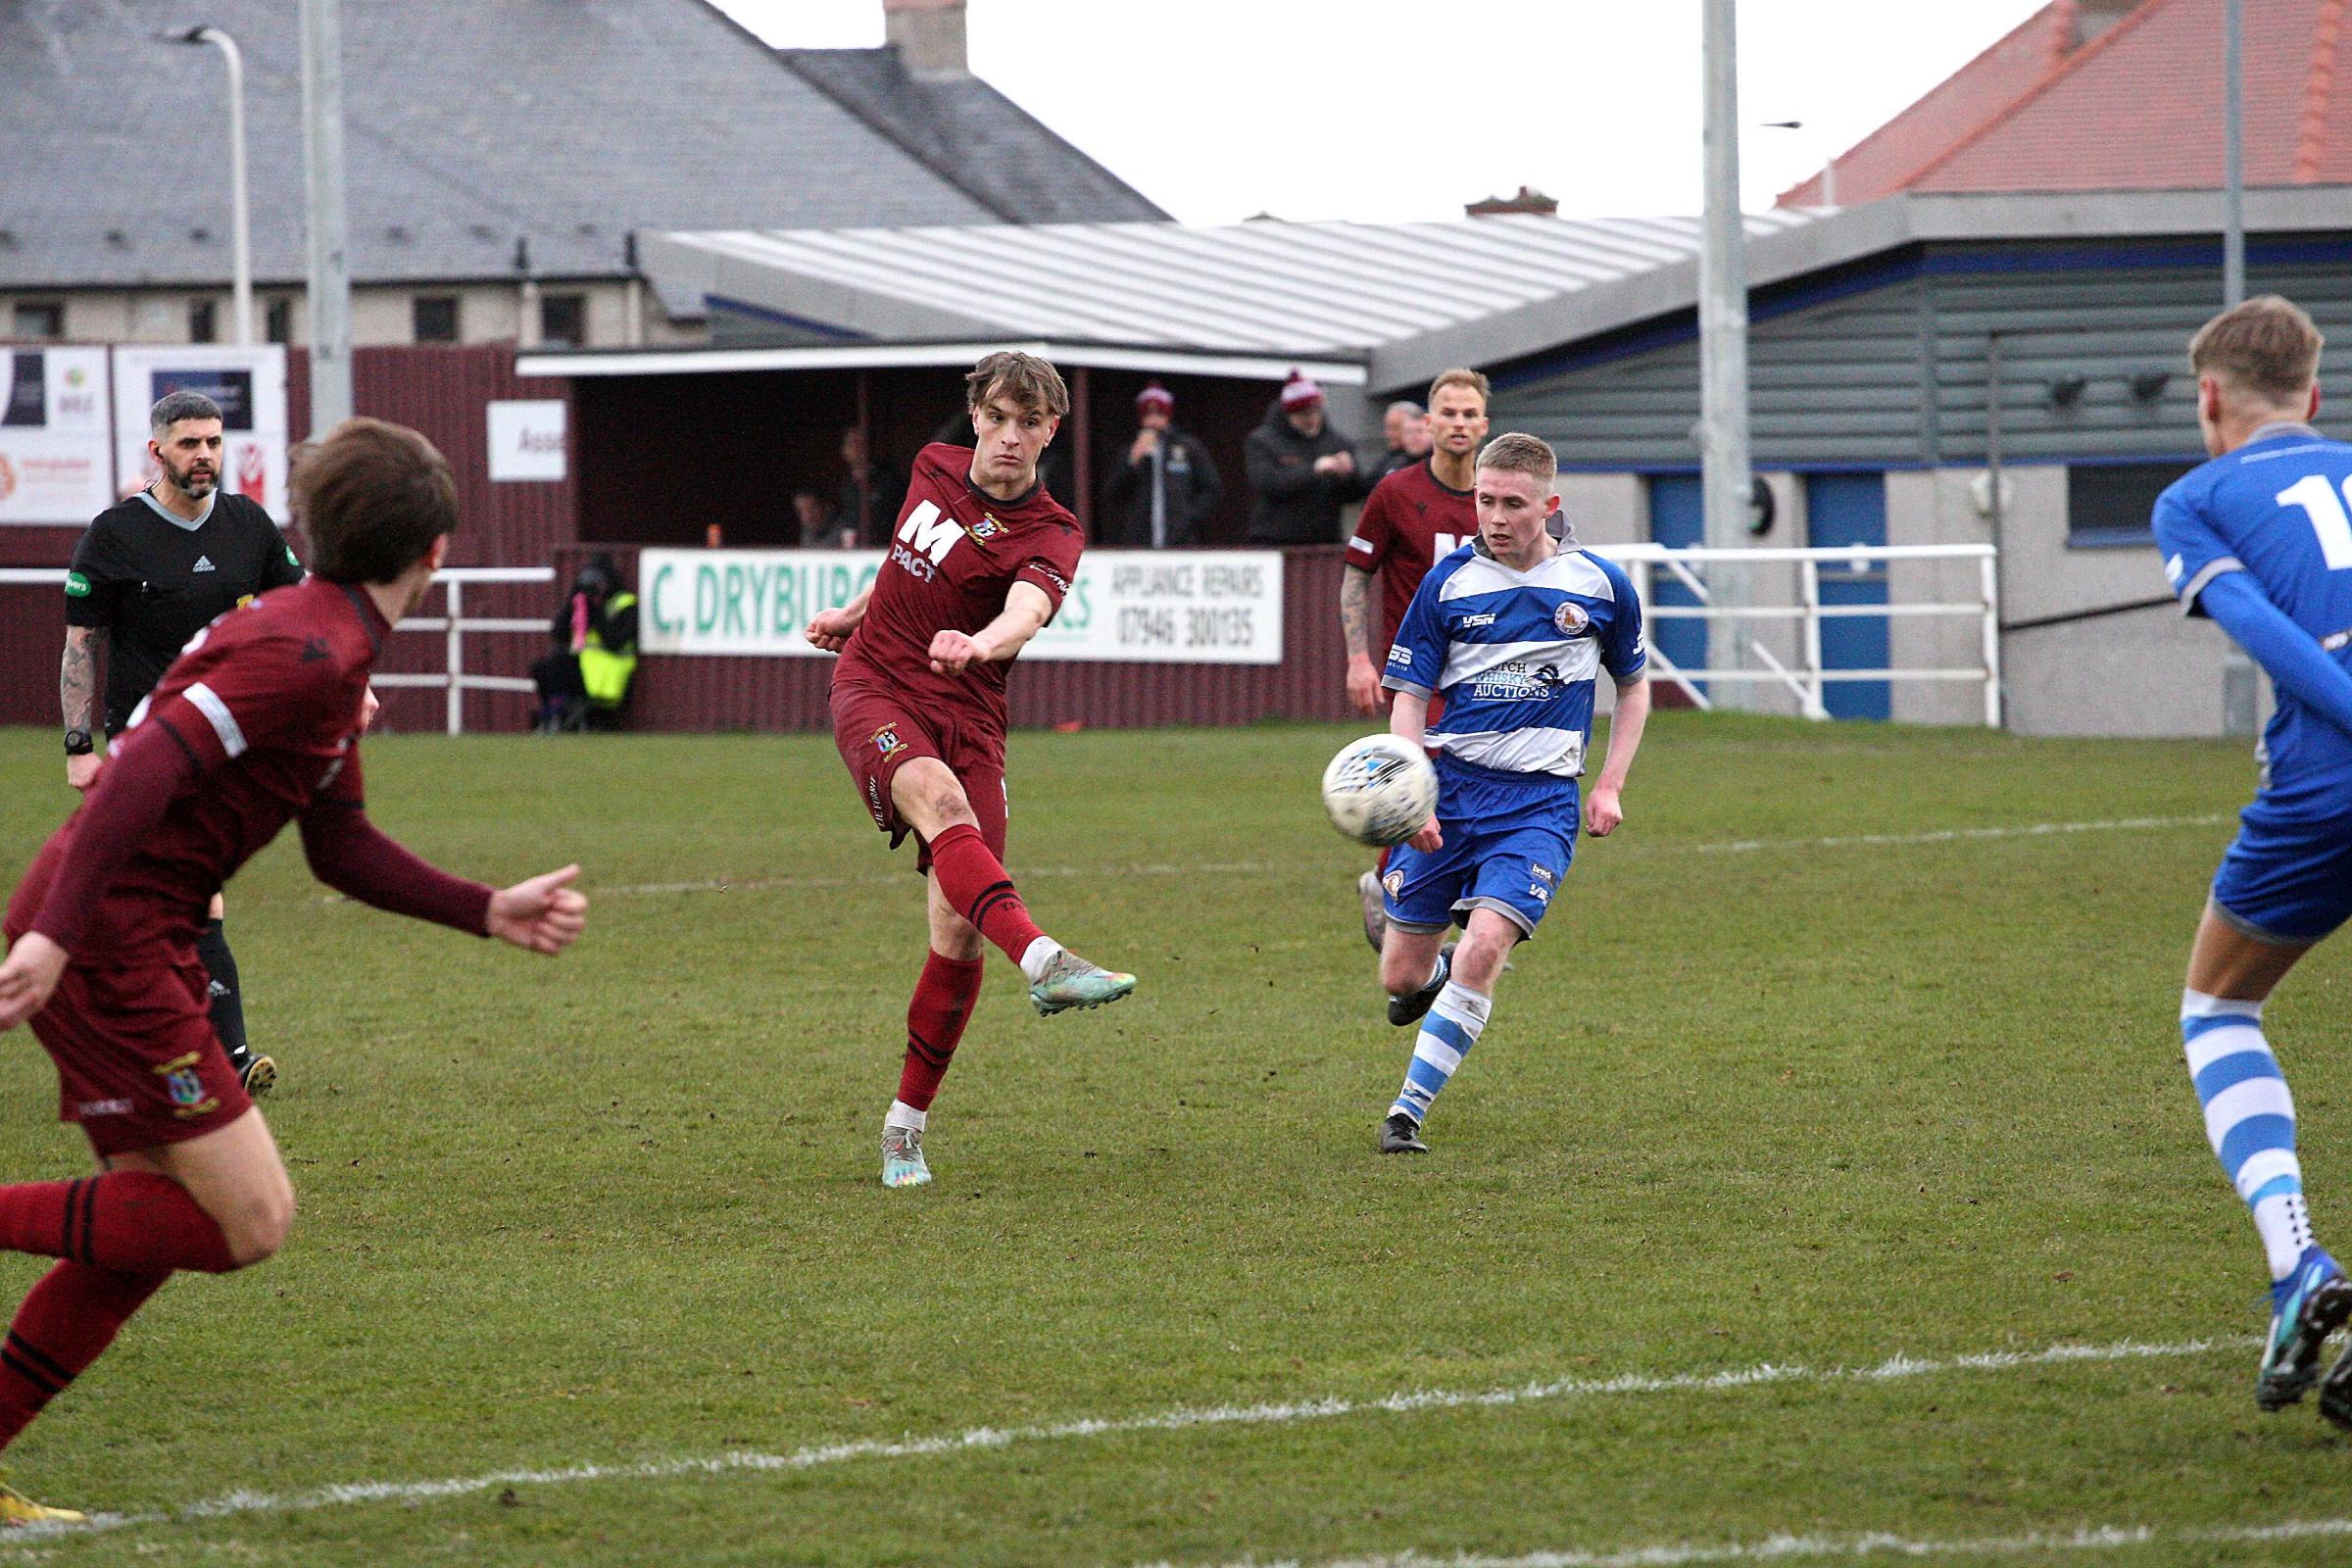 Tranent (maroon) proved too strong for Kilwinning Rangers in the South of Scotland Challenge Cup recently